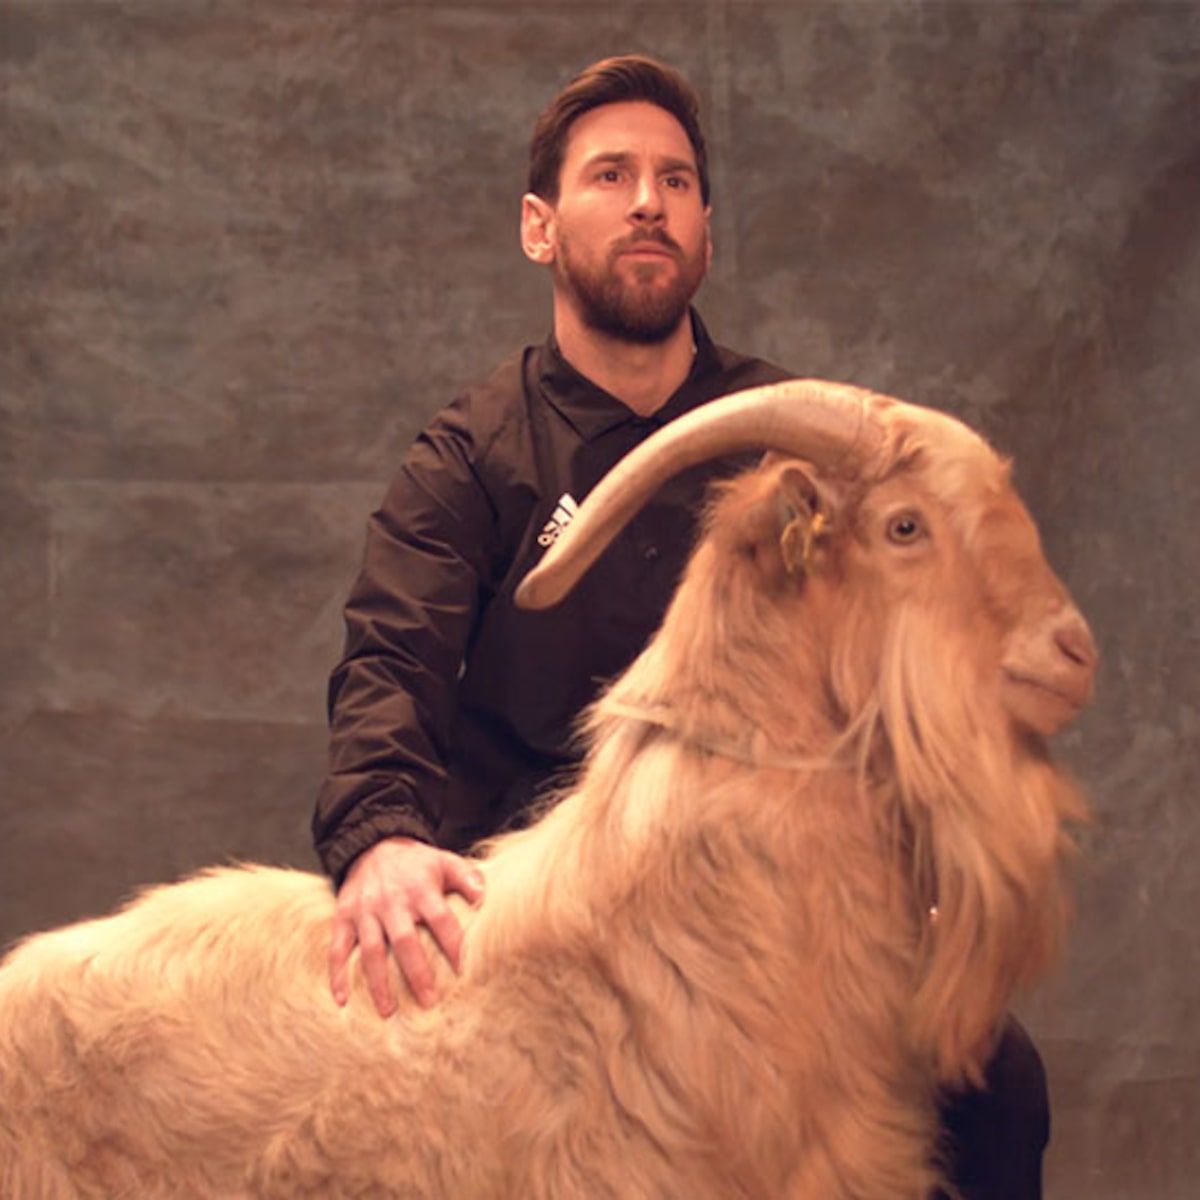 Lionel Messi Poses with Goats While Saying He's Not the G.O.A.T